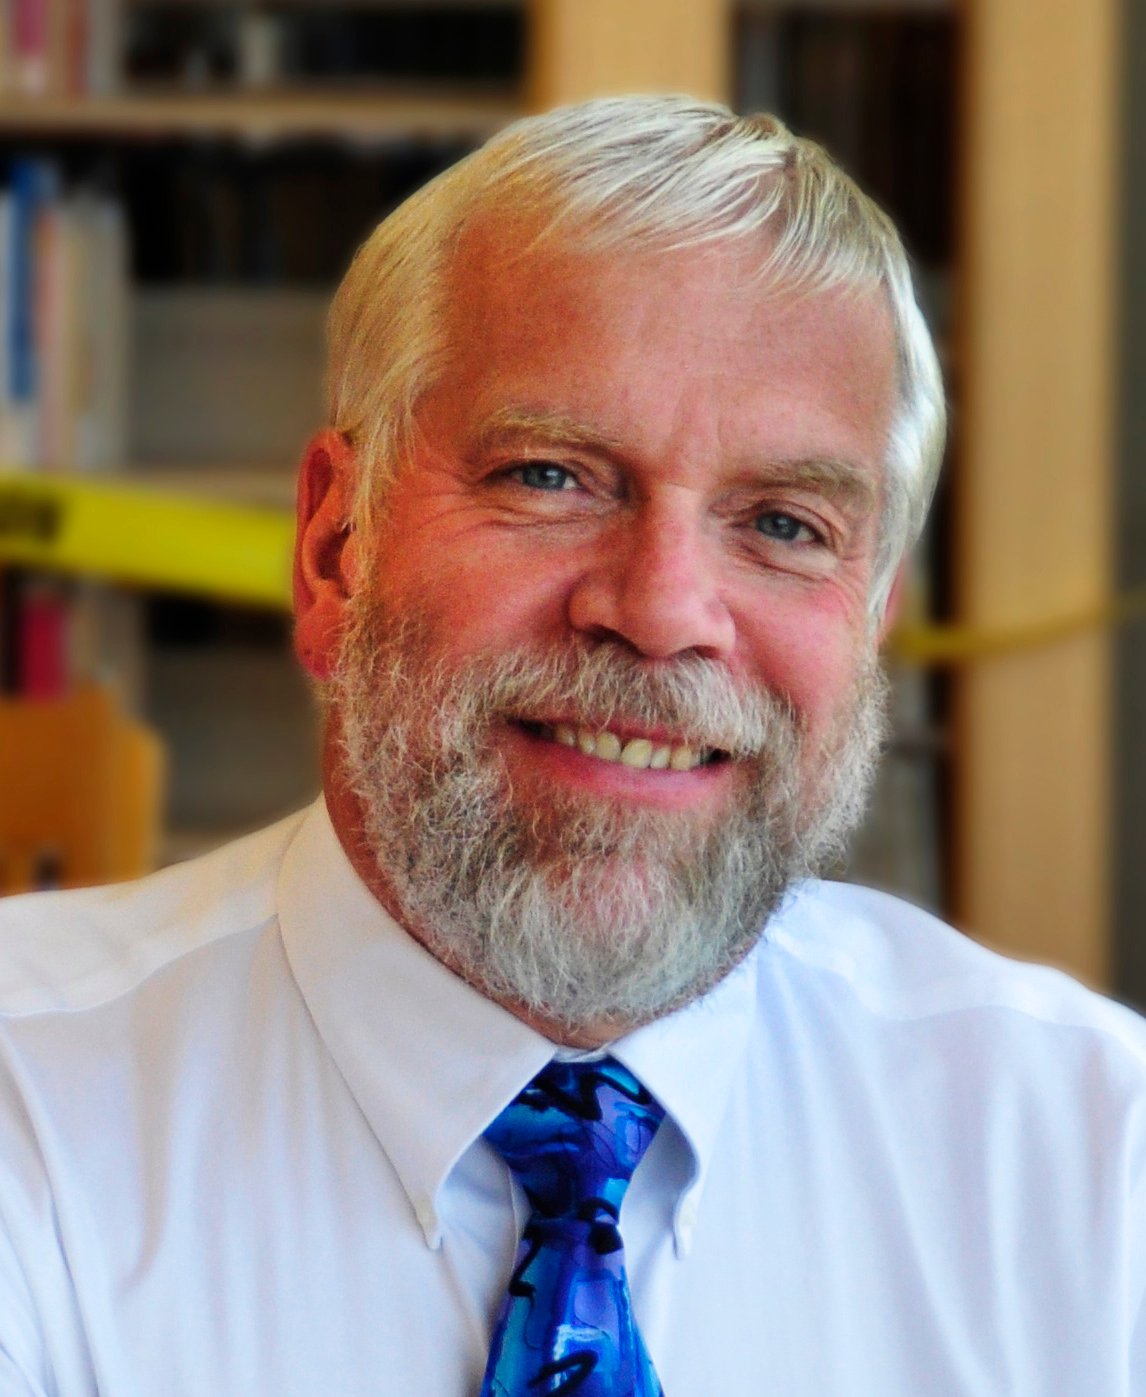 David Lewis, a white man with white hair and a beard wearing a blue necktie.